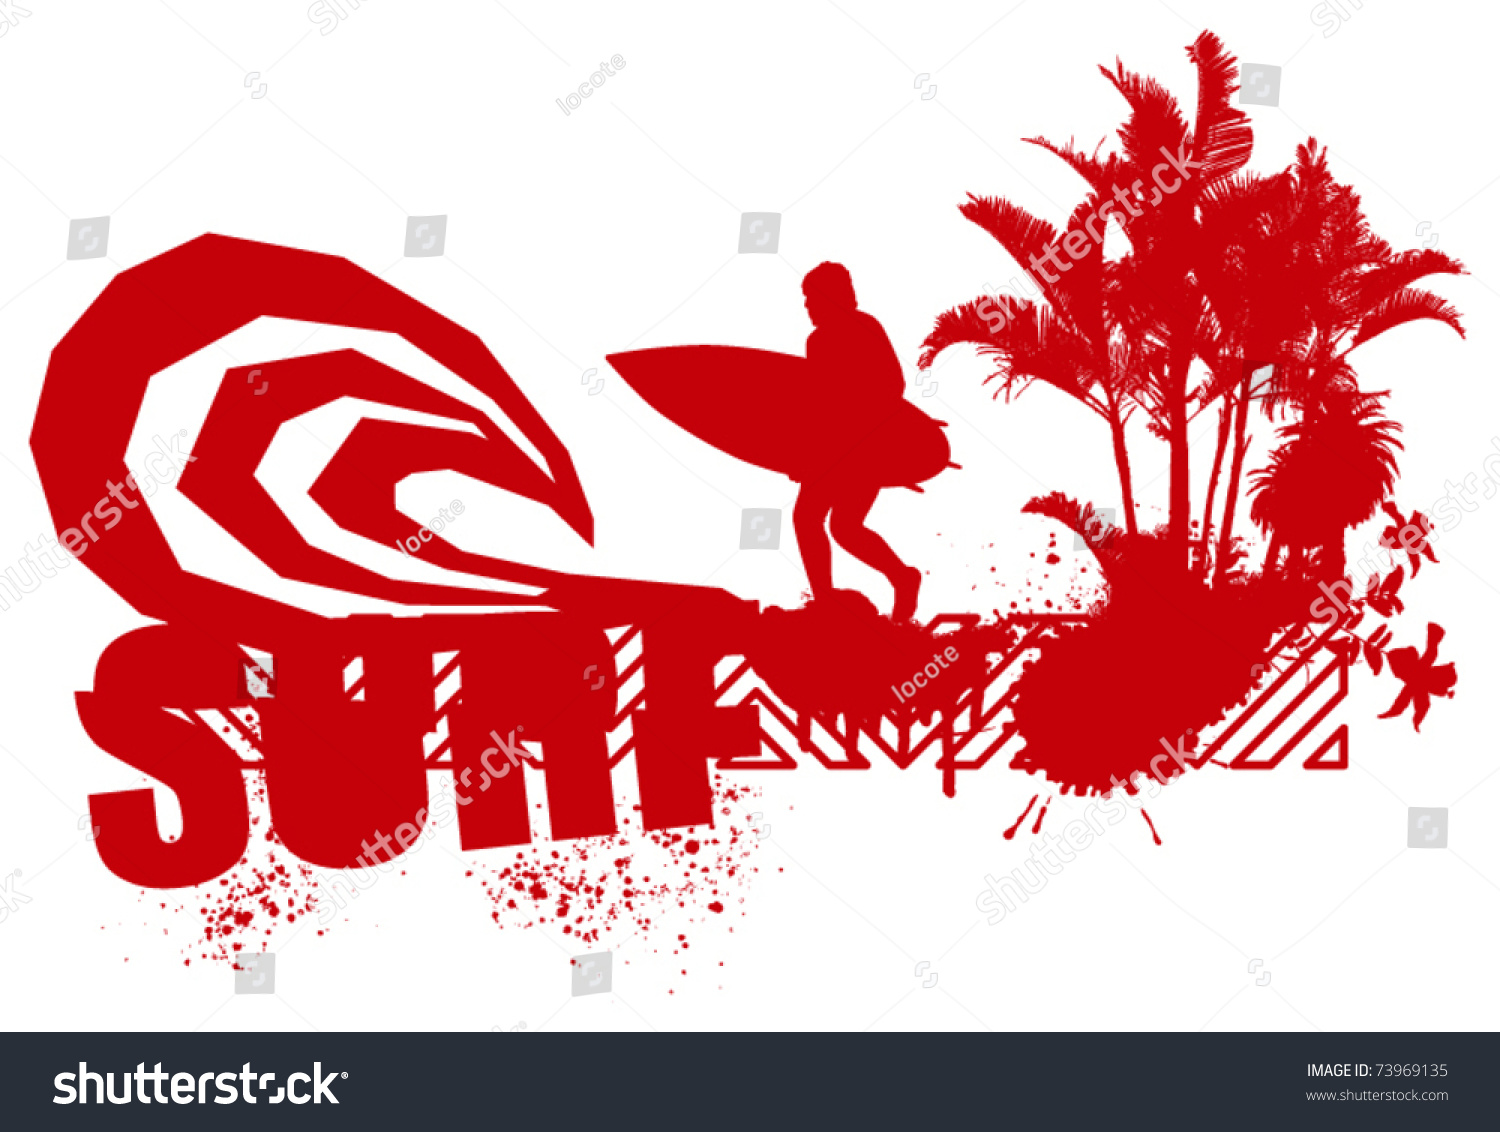 red surfer with big wave and palms #73969135